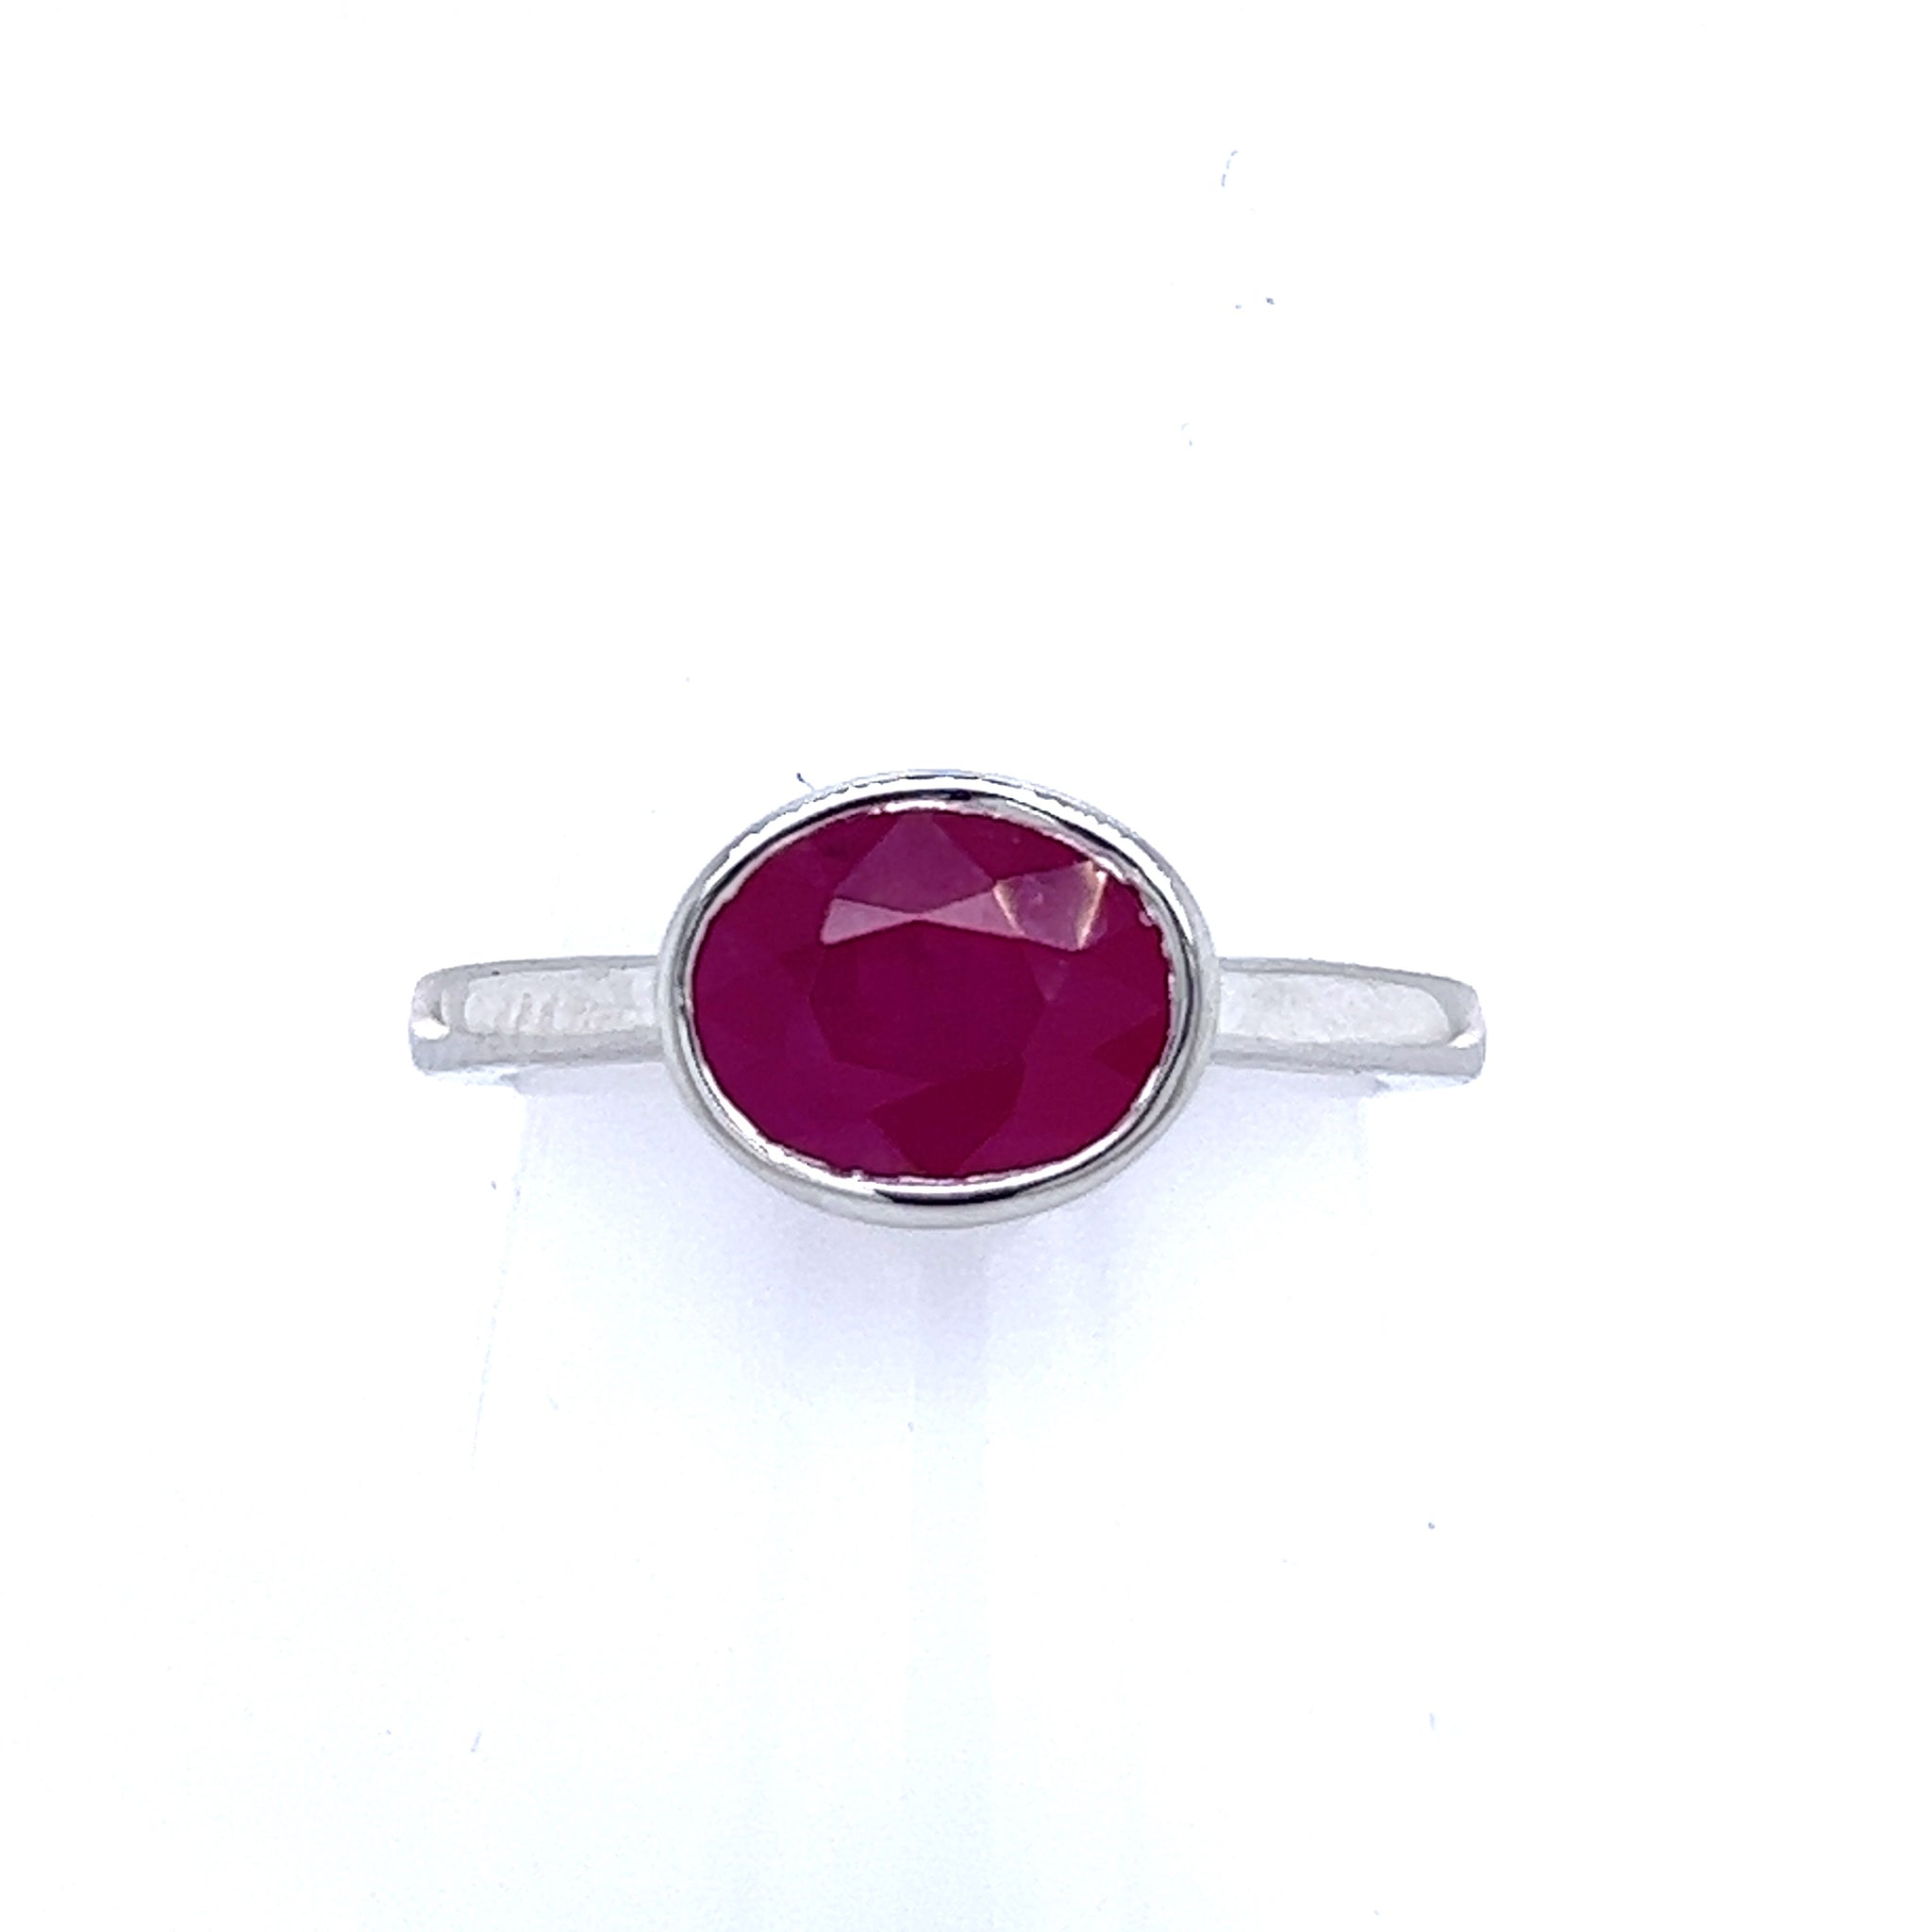 Natural Ruby Ring 6.5 14k White Gold 2.38 TCW Certified $2,190 221354